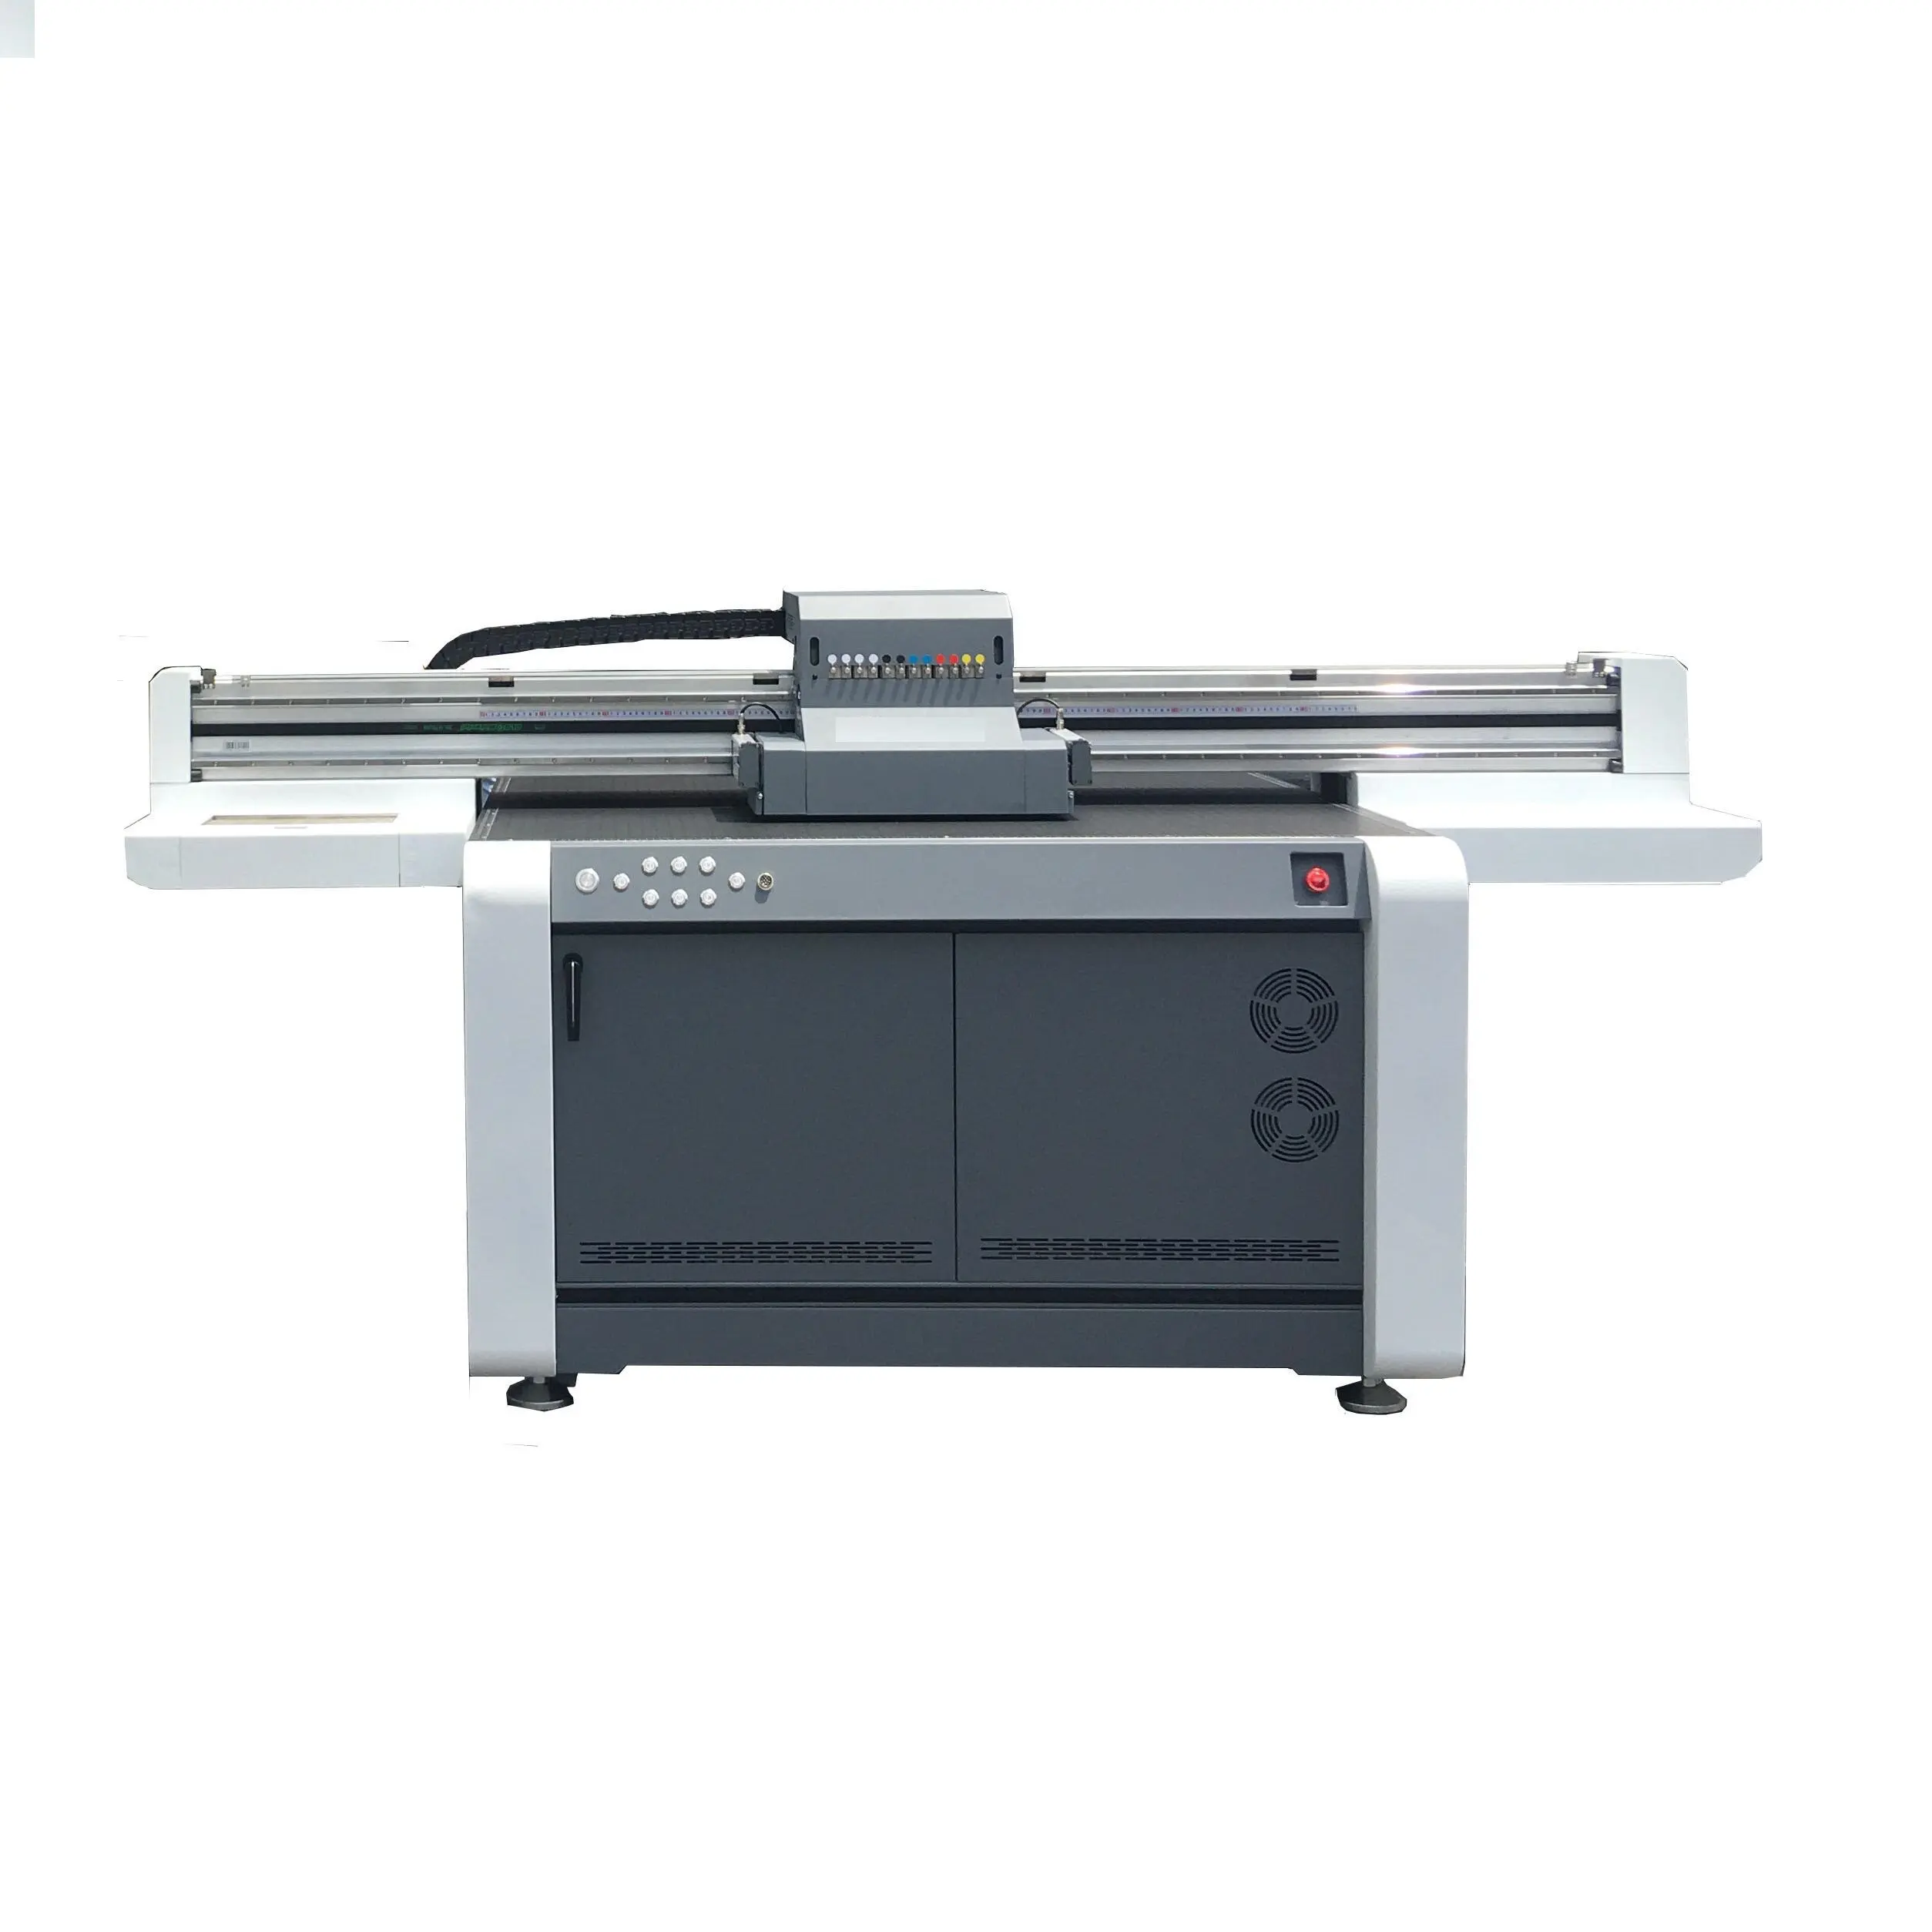 High level industry 1311 uv printer high drop printing machine with I3200 or G5i